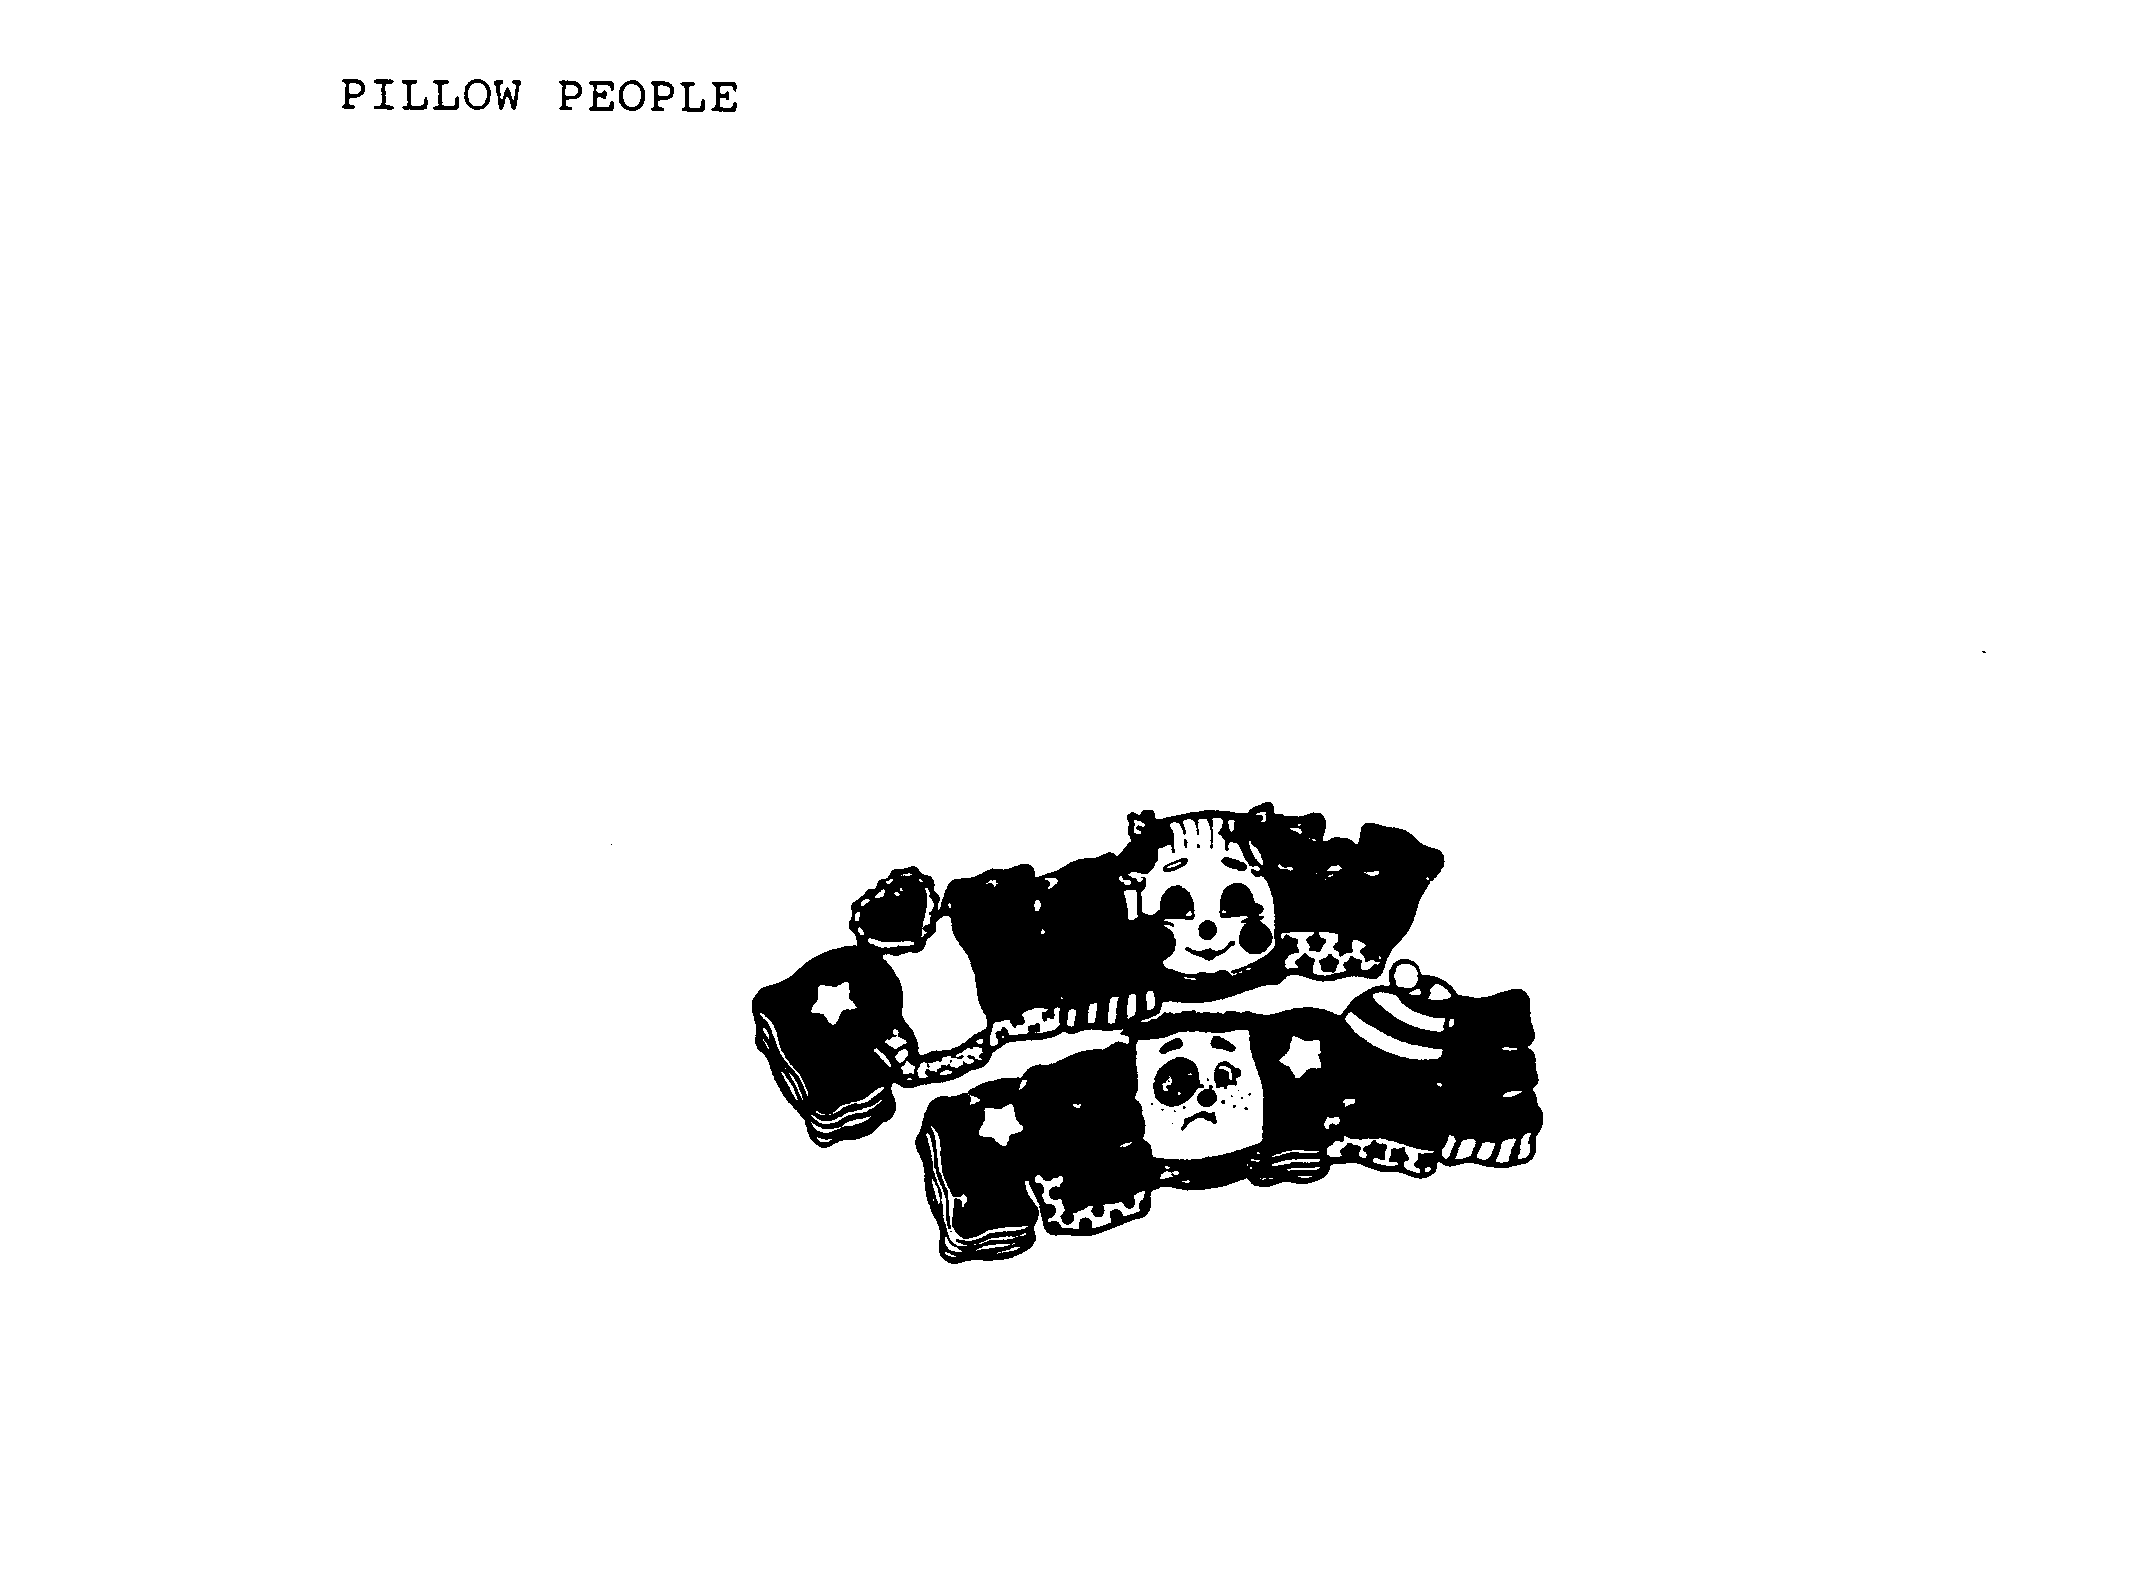 PILLOW PEOPLE